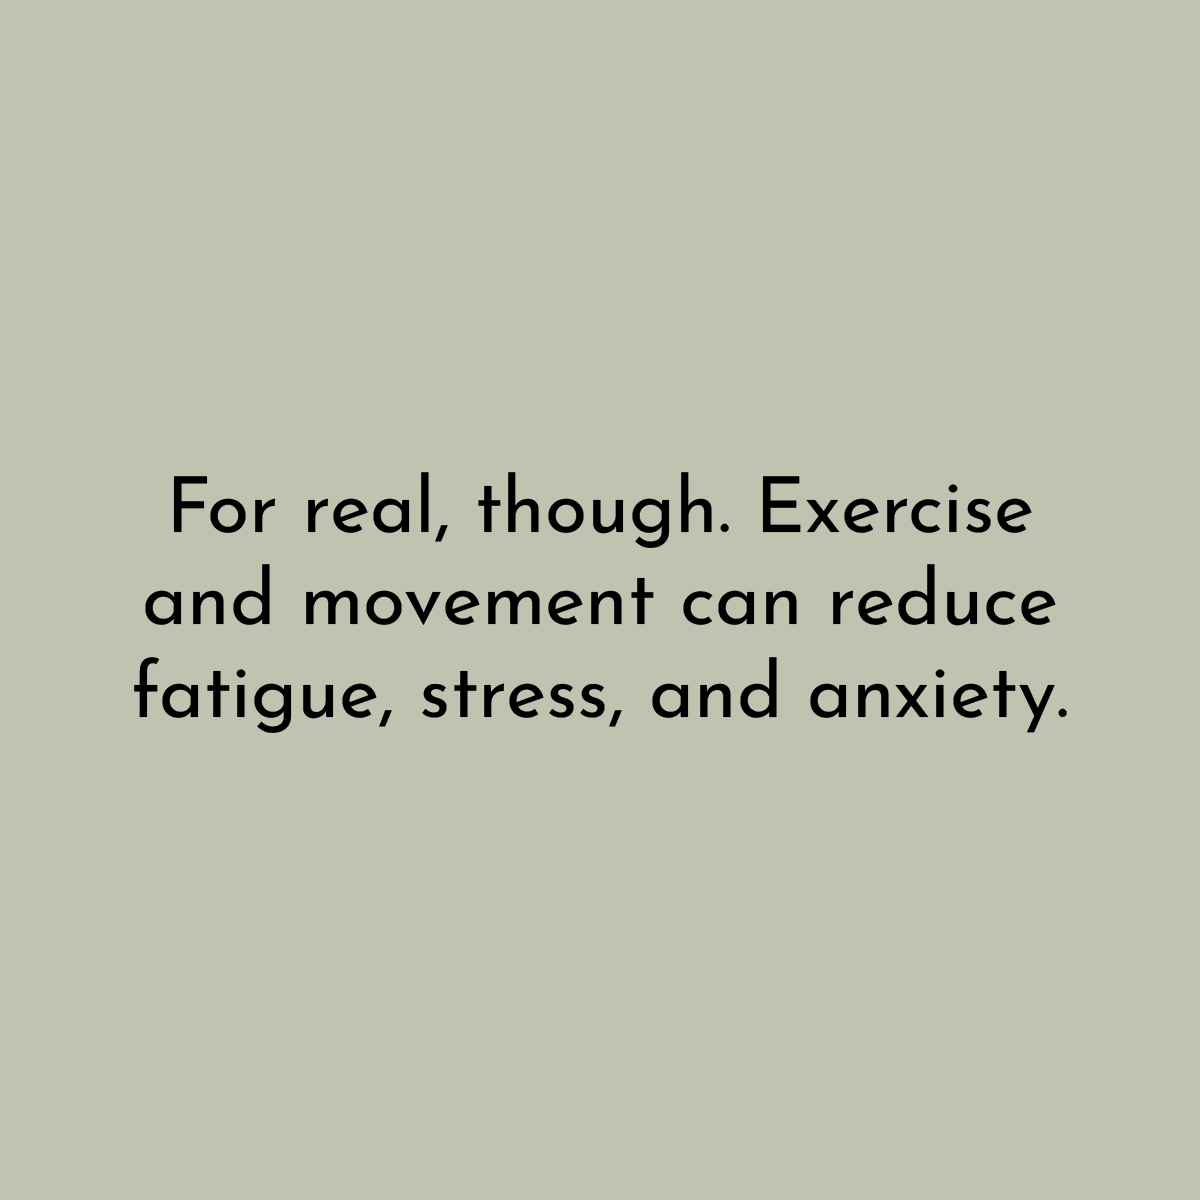 For real, though. Exercise and movement can reduce fatigue, stress, and anxiety.